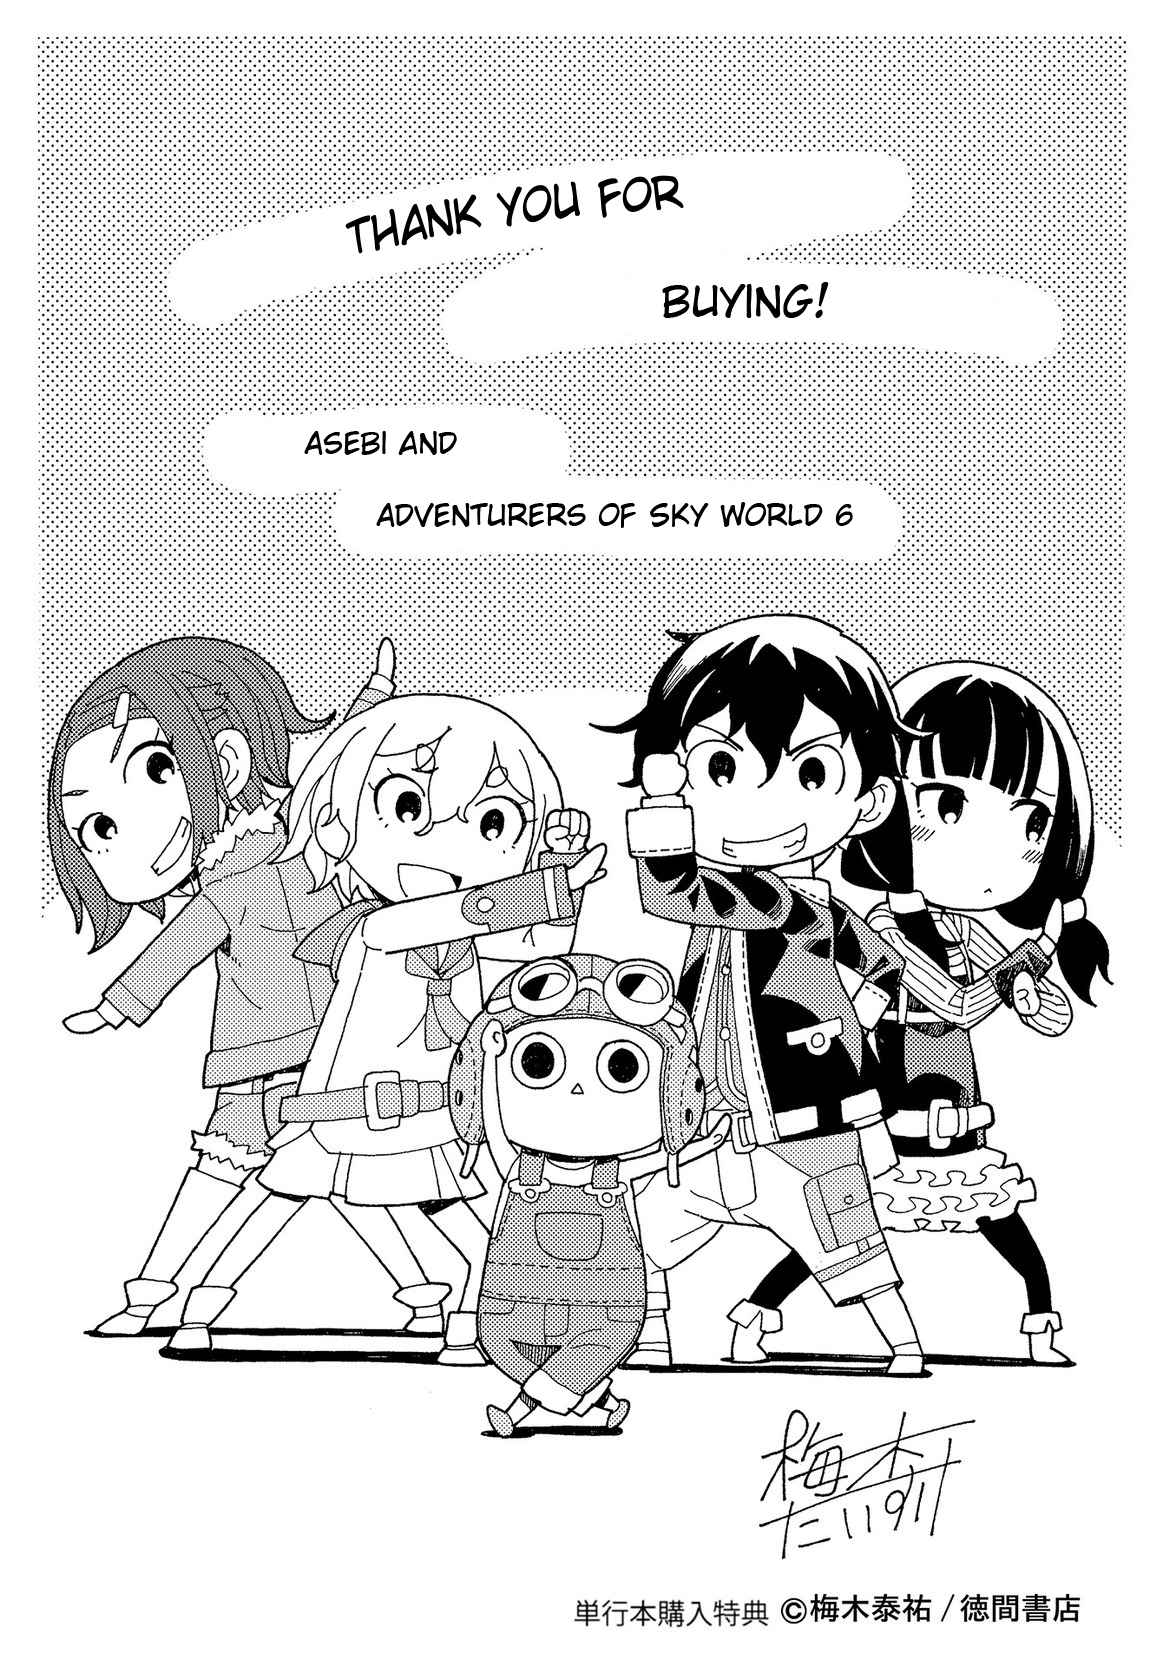 Asebi and Adventurers of Sky World Vol. 6 Ch. 32 Decision and battle start